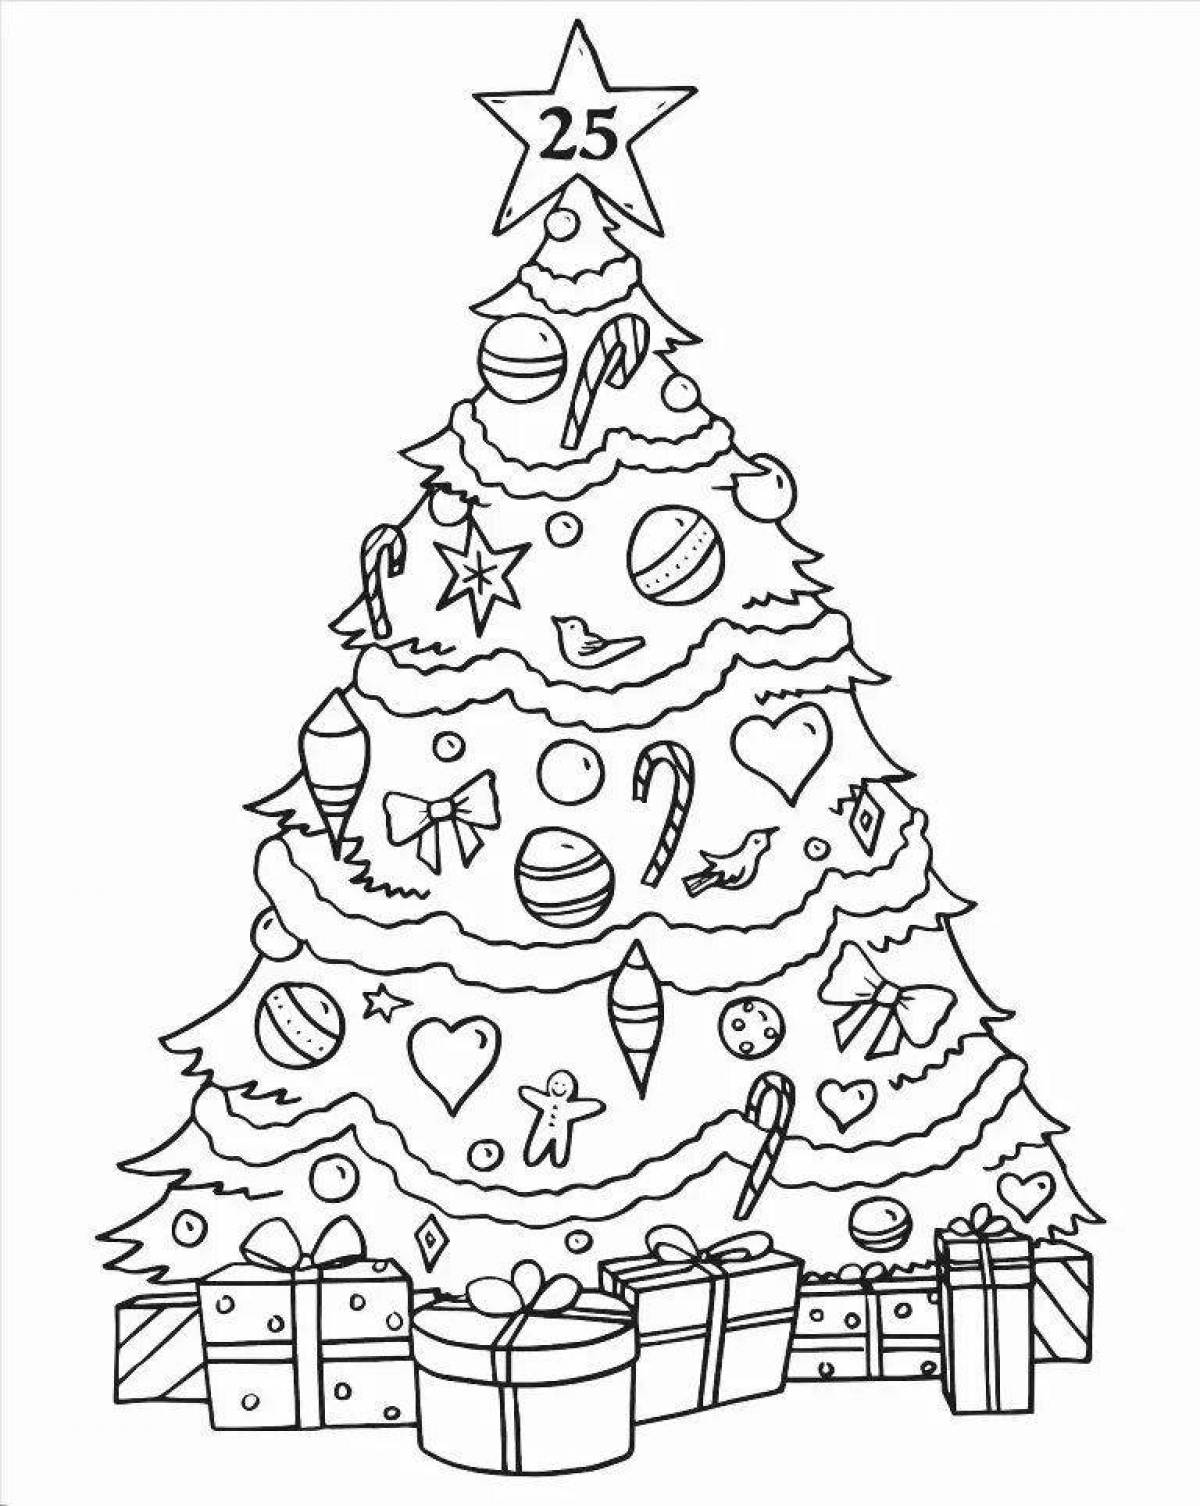 Dazzling drawing of a Christmas tree